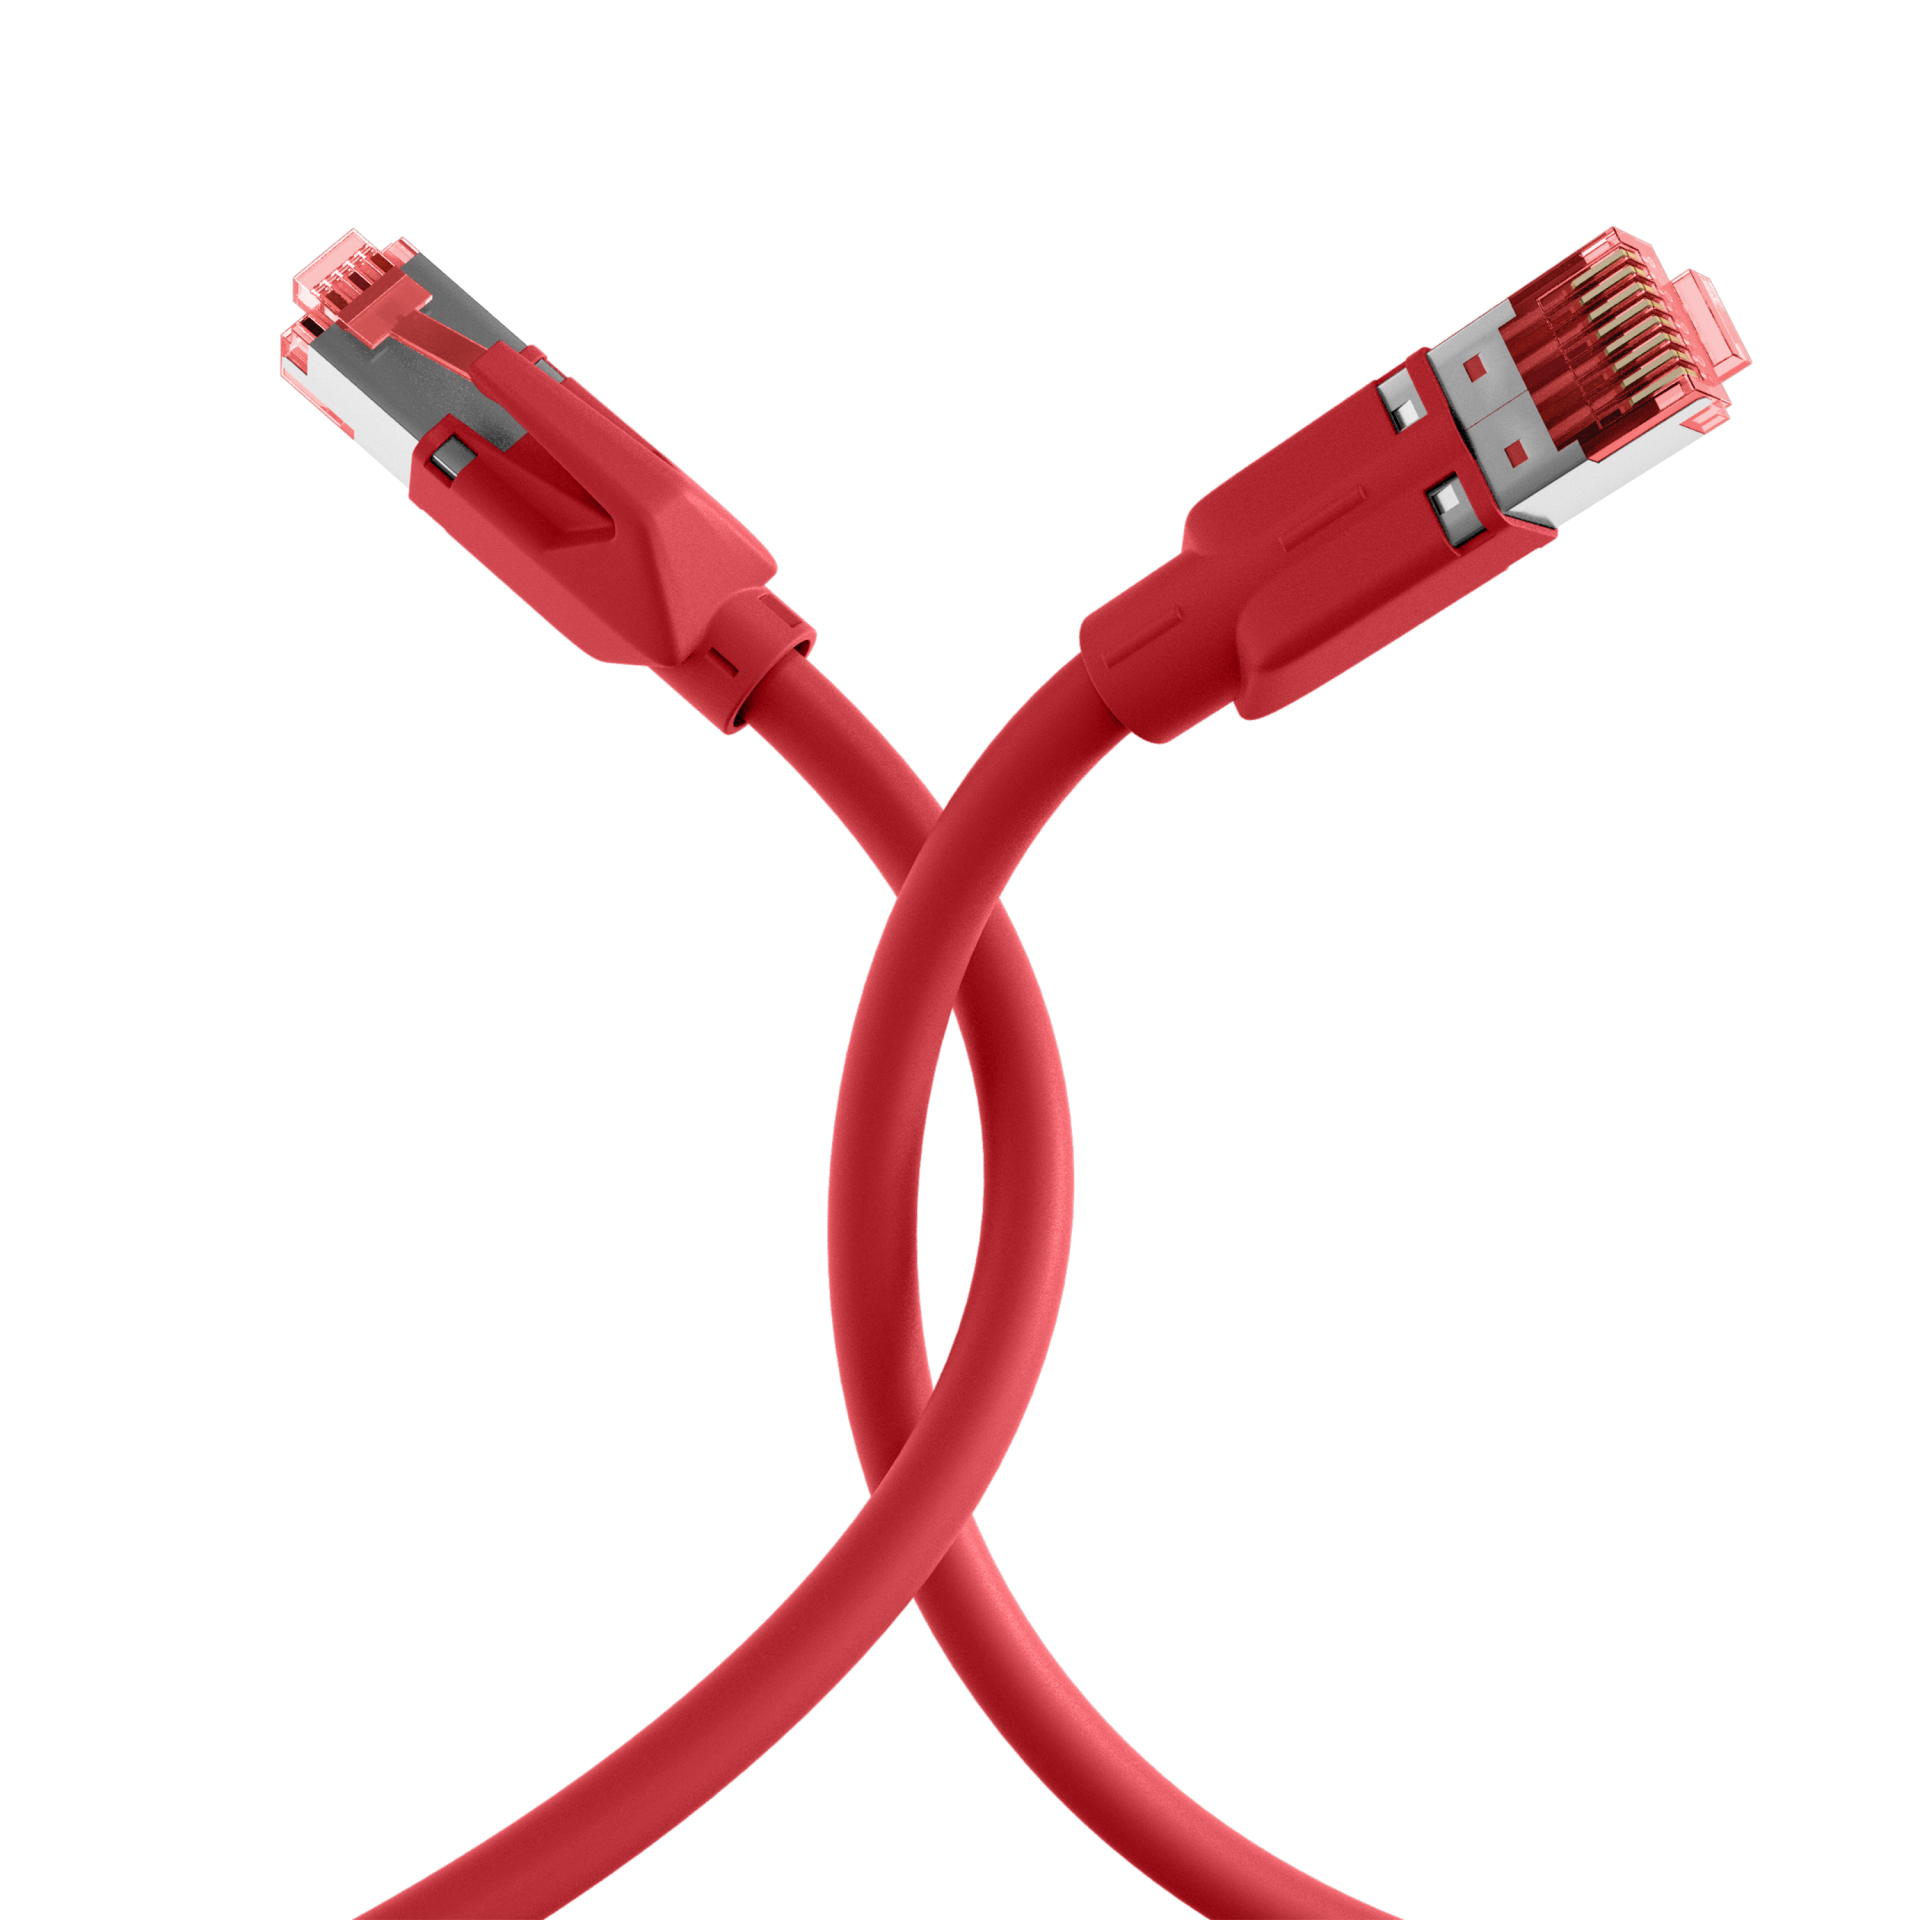 RJ45 Patch Cord Cat.6A S/FTP Dätwyler 7702 TM21 red 5m